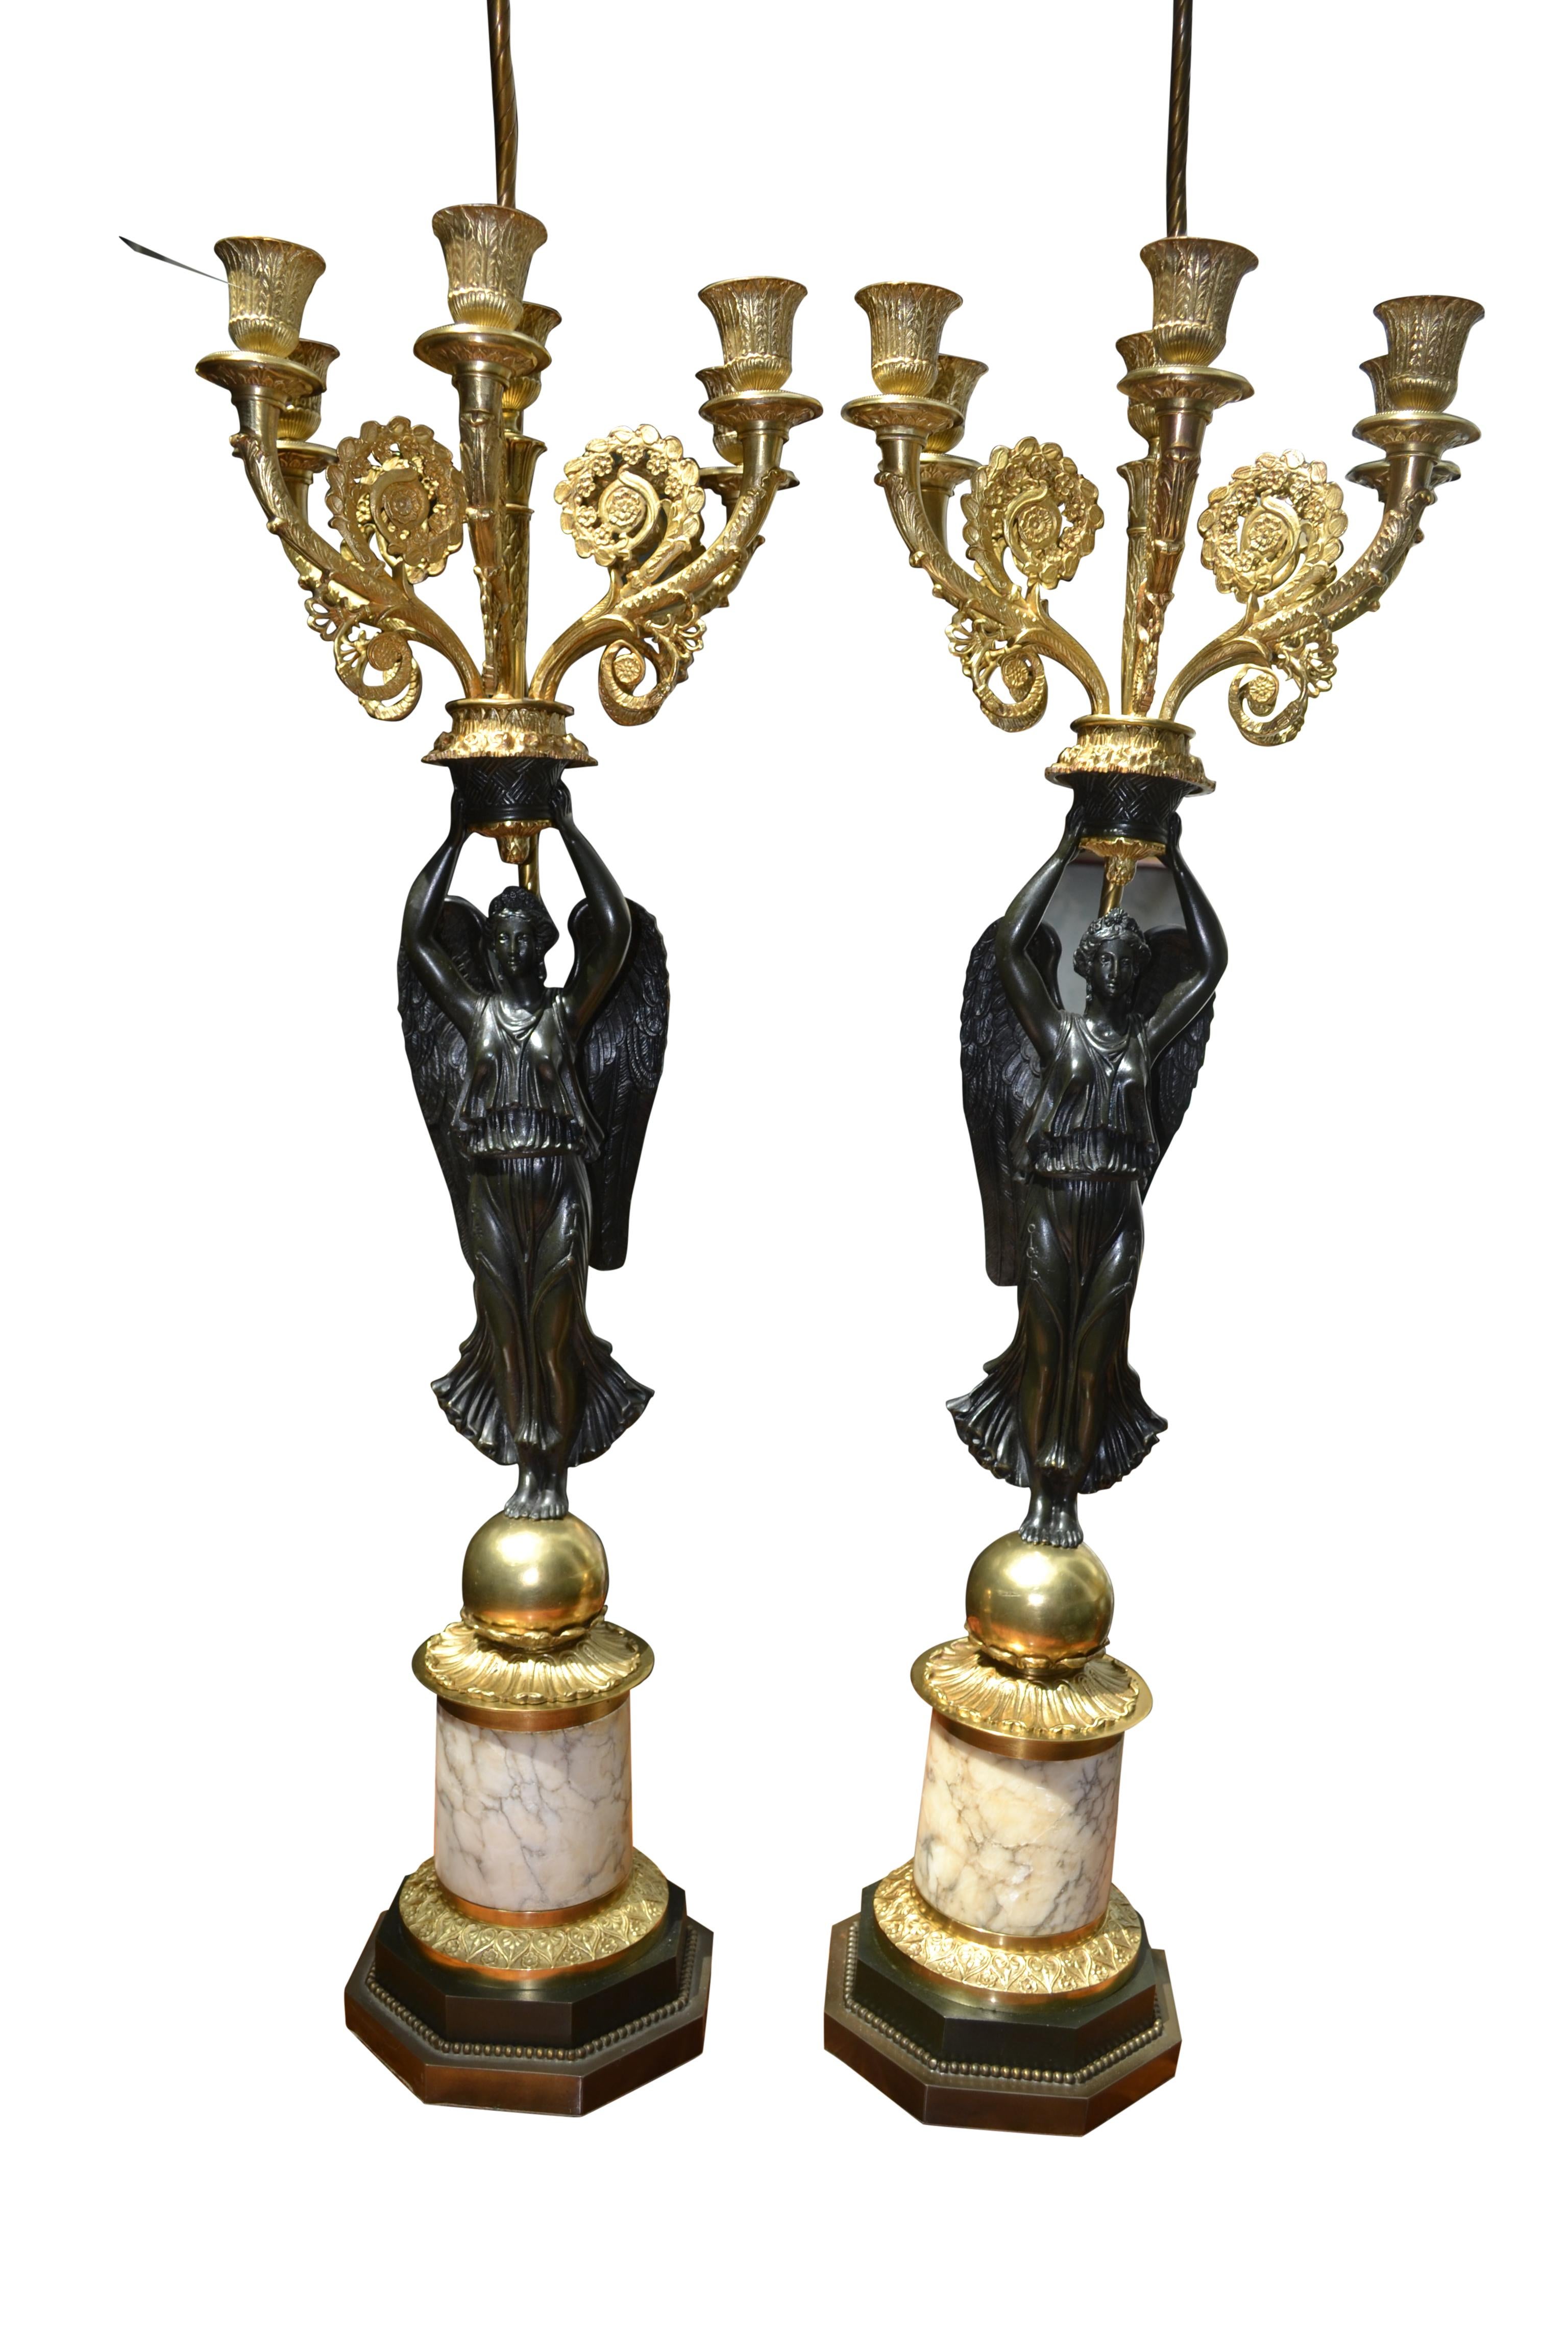 A Pair of French Empire Style Patinated and Gilt Bronze Winged Victory Lamps For Sale 6